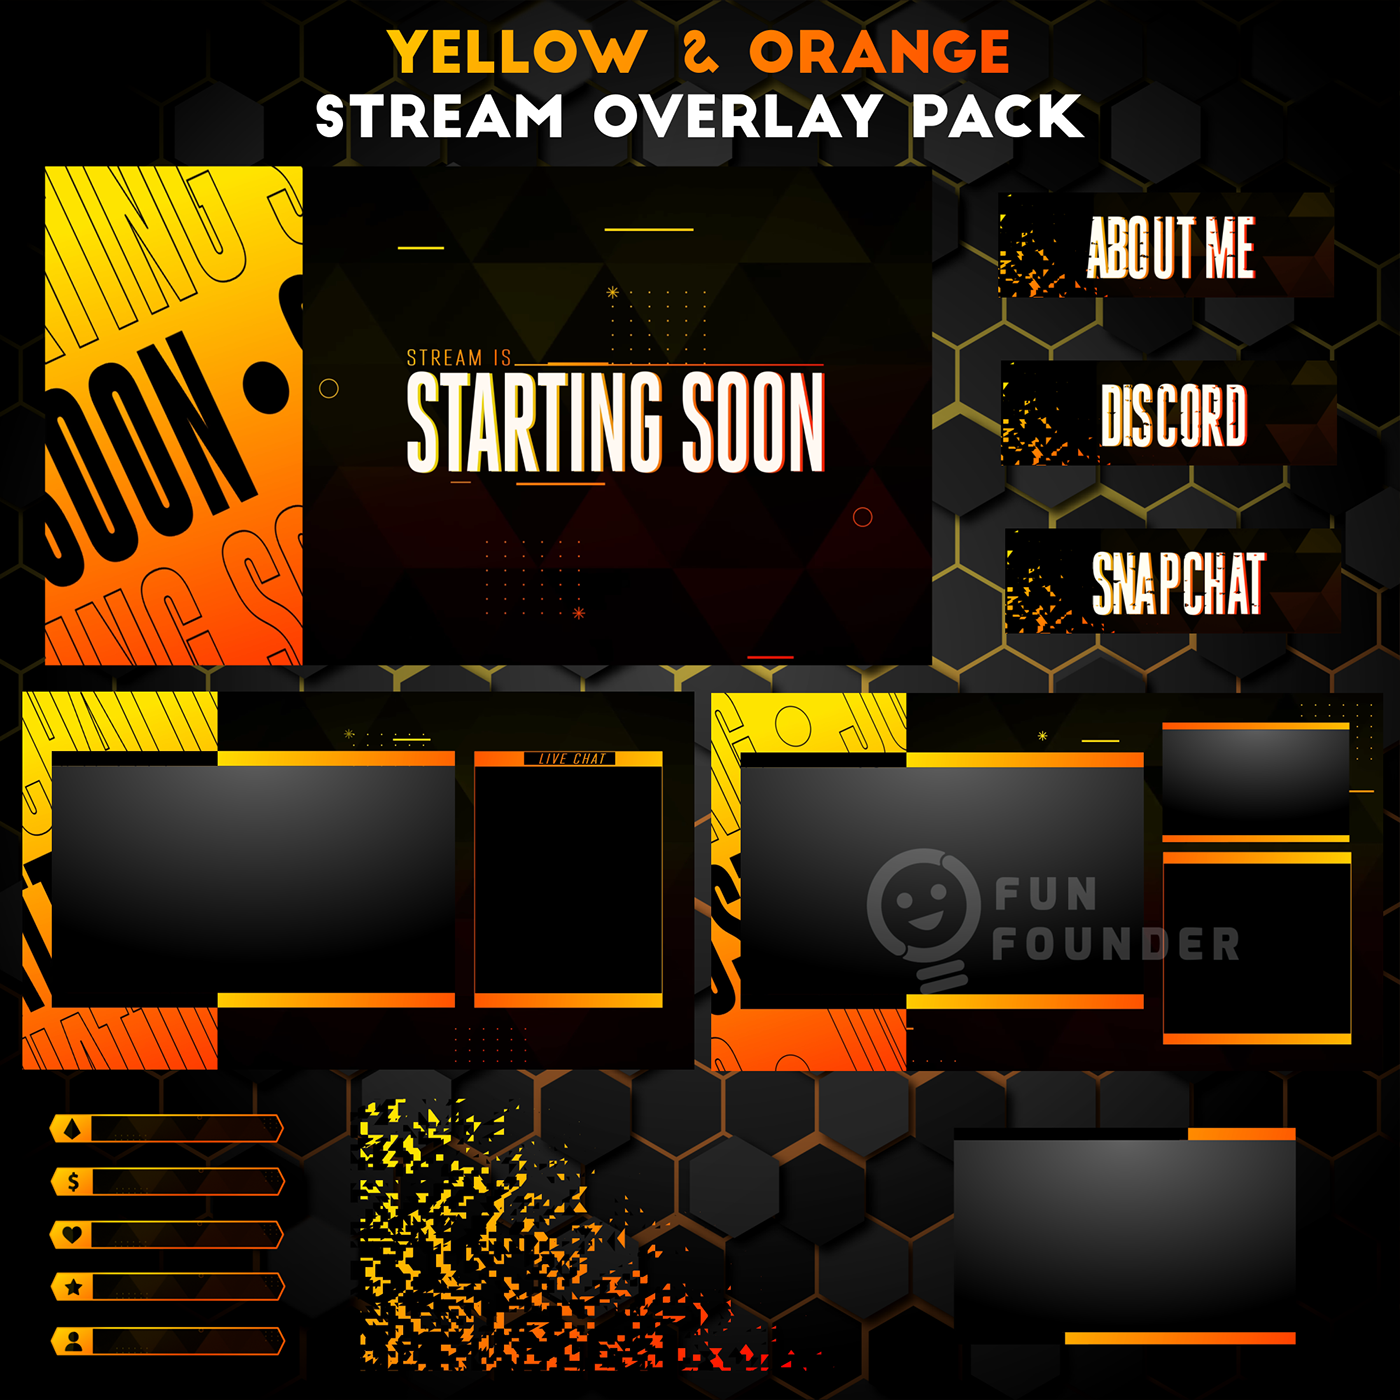 Twitch Twitch Overlay stream overlay live stream Gaming facebook gaming Streamlabs Free Stream Overlay Valo OBS YouTube Gaming